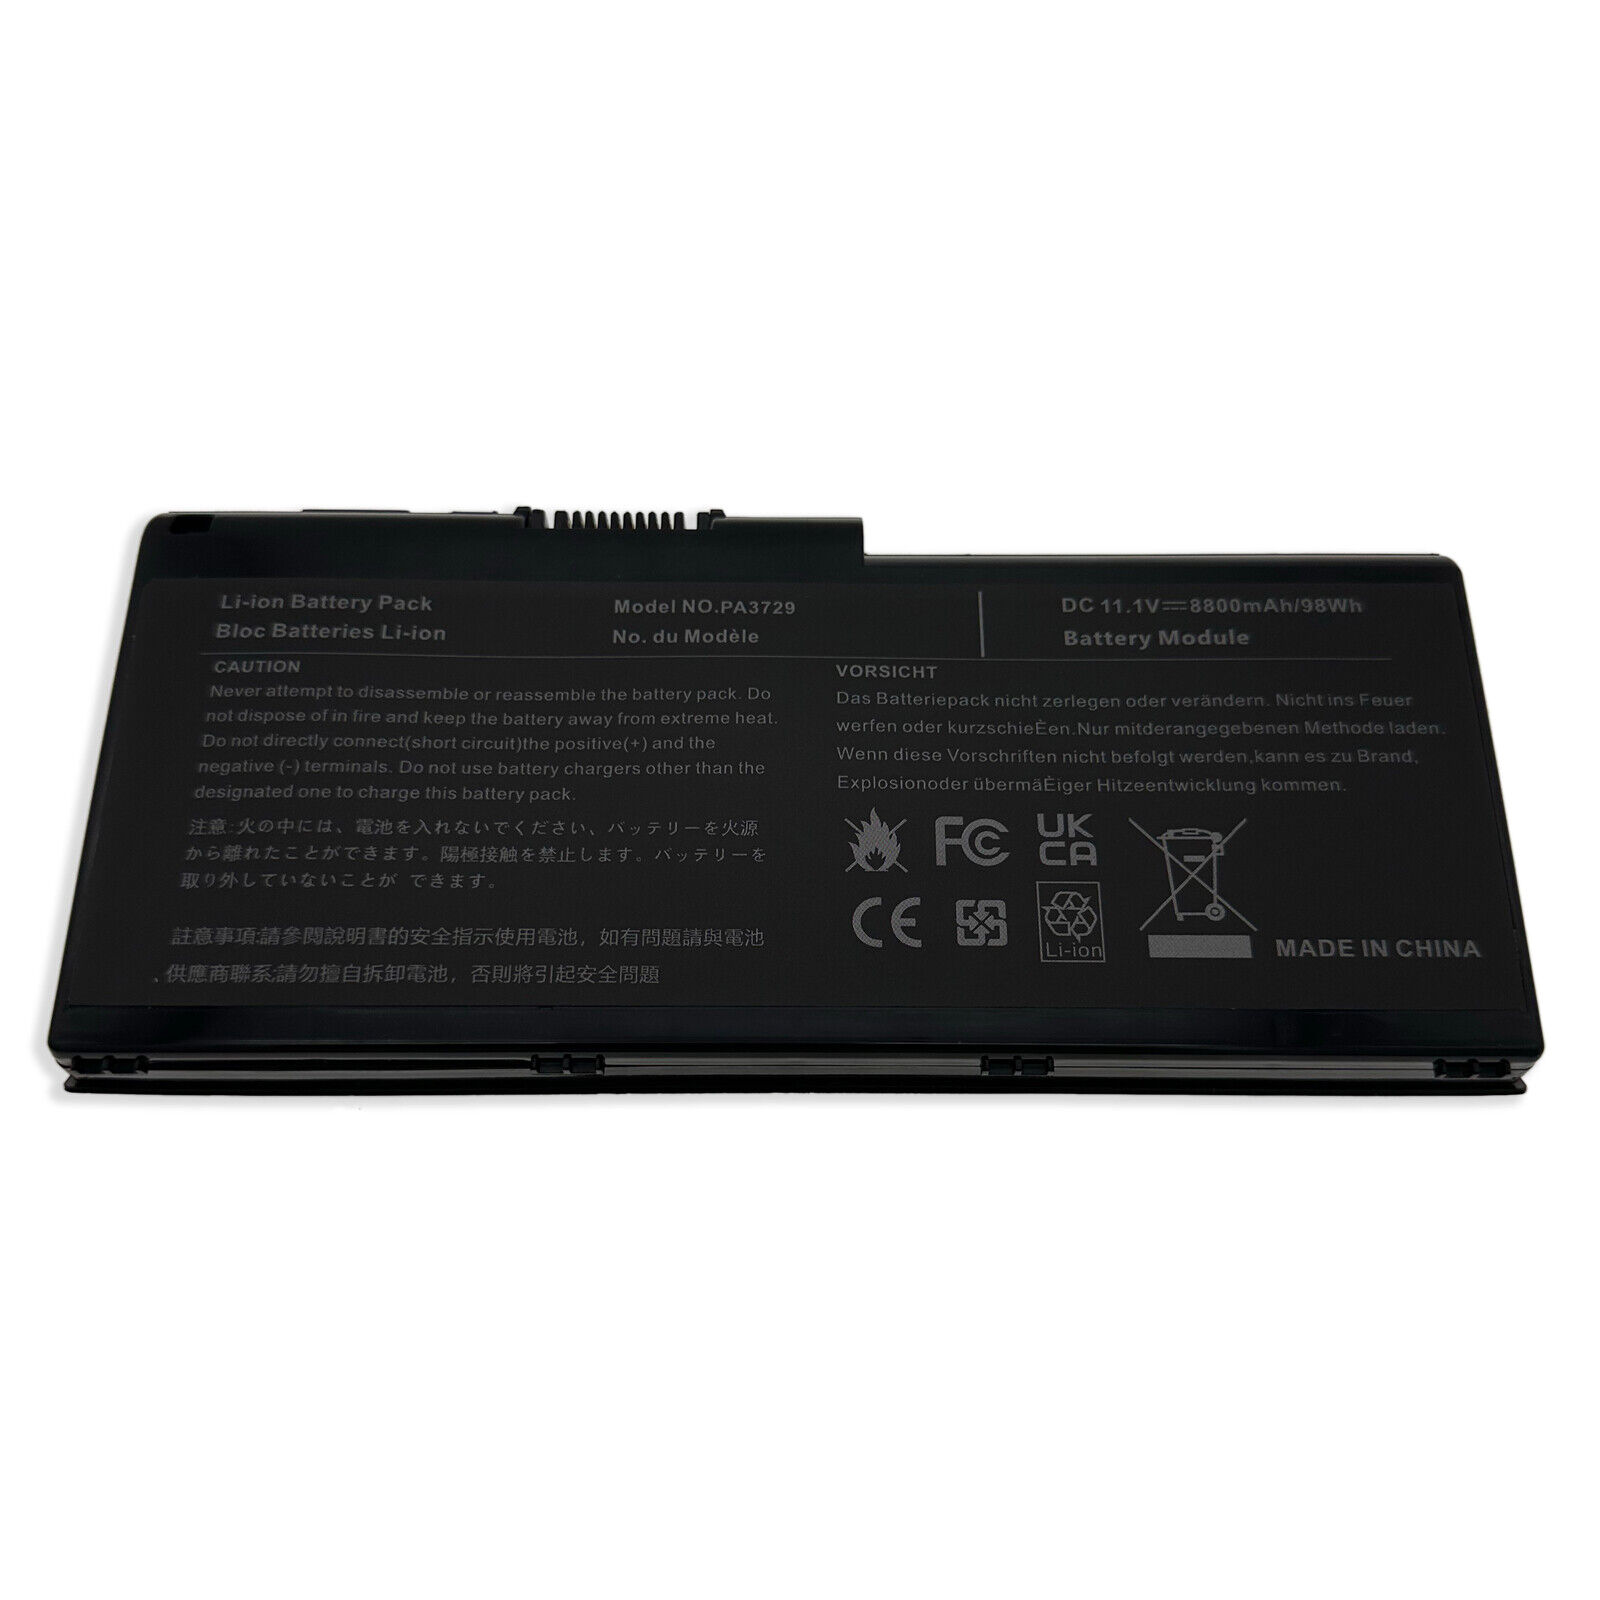 New 12Cell Laptop Battery For Toshiba Satellite P505-S8022 P505-S8020 P505-S8011